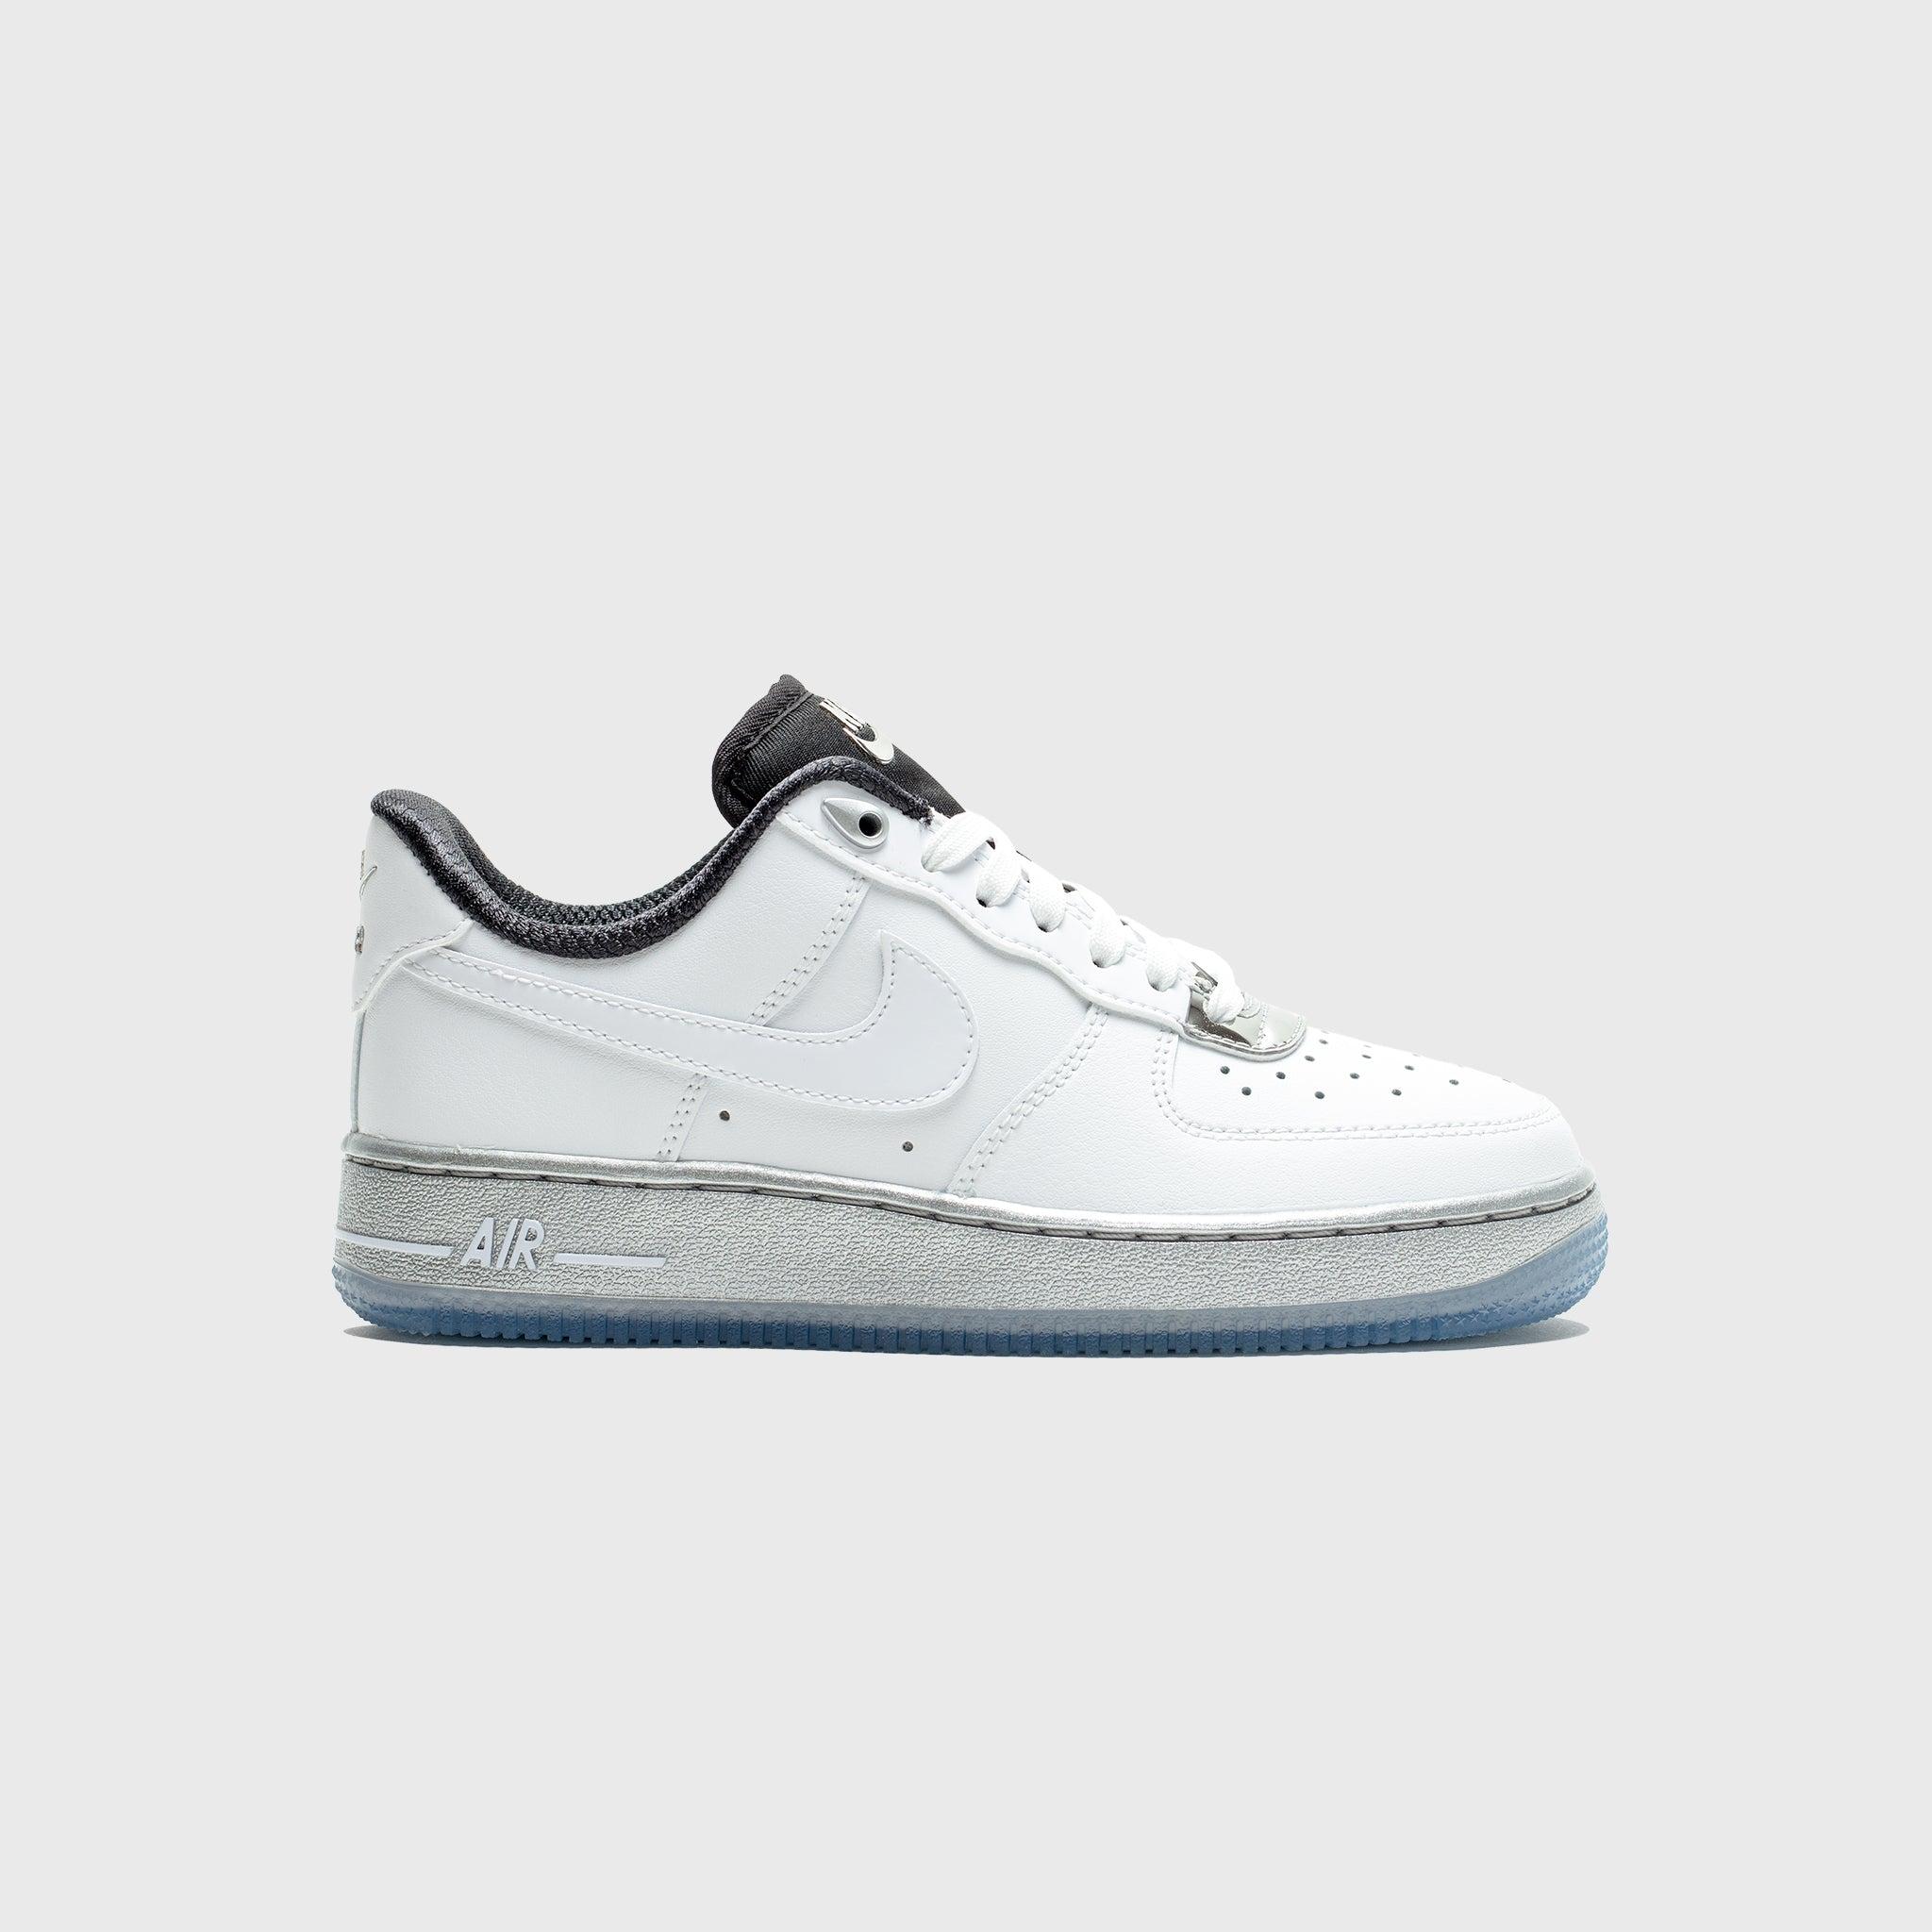 Nike Air Force 1 '07 Se Shoes in White | Lyst